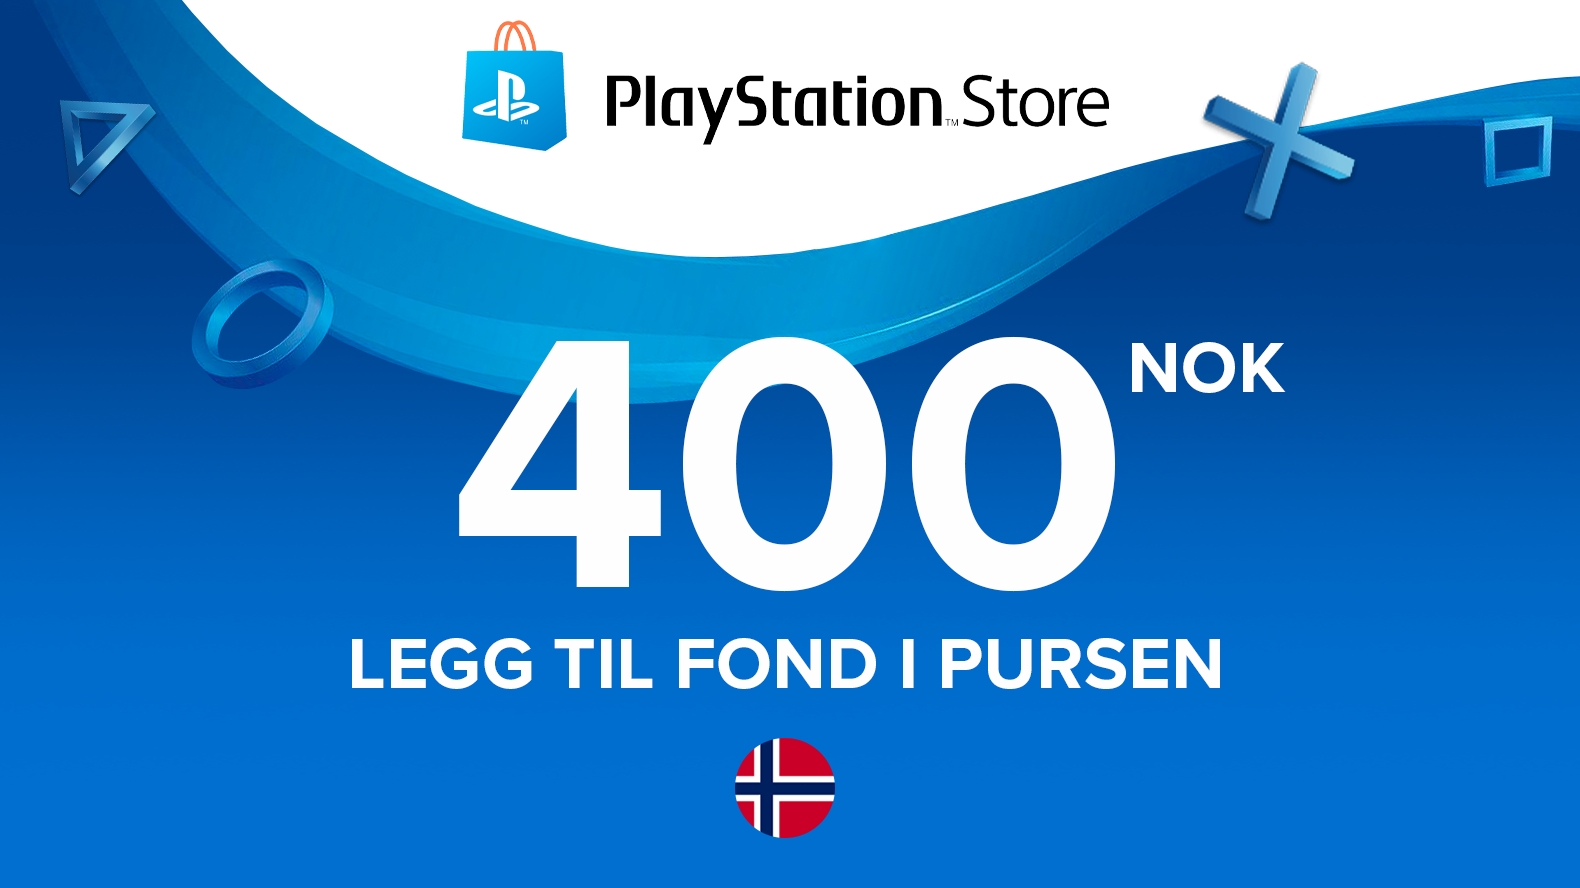 Playstation norge